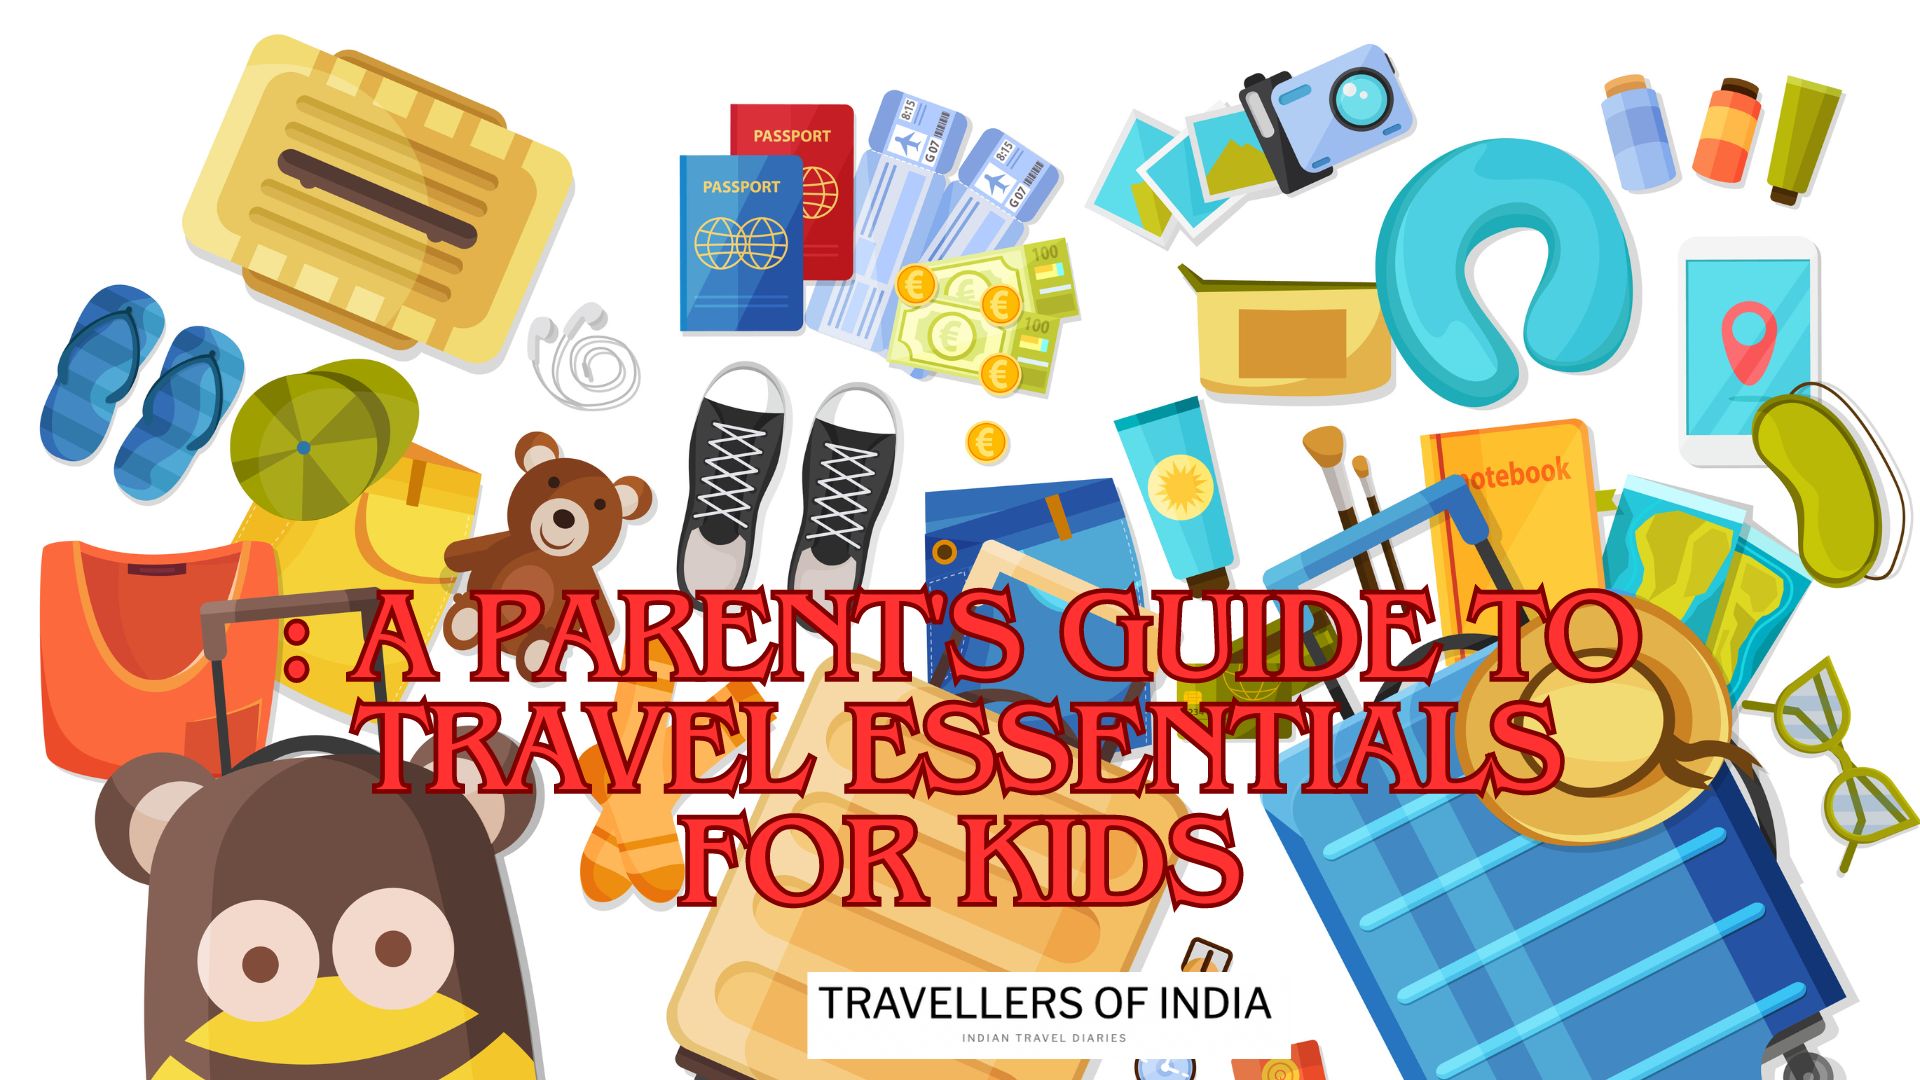 A_Parents_Guide_to_Travel_Essentials_for_Kids_travellersofindia.com